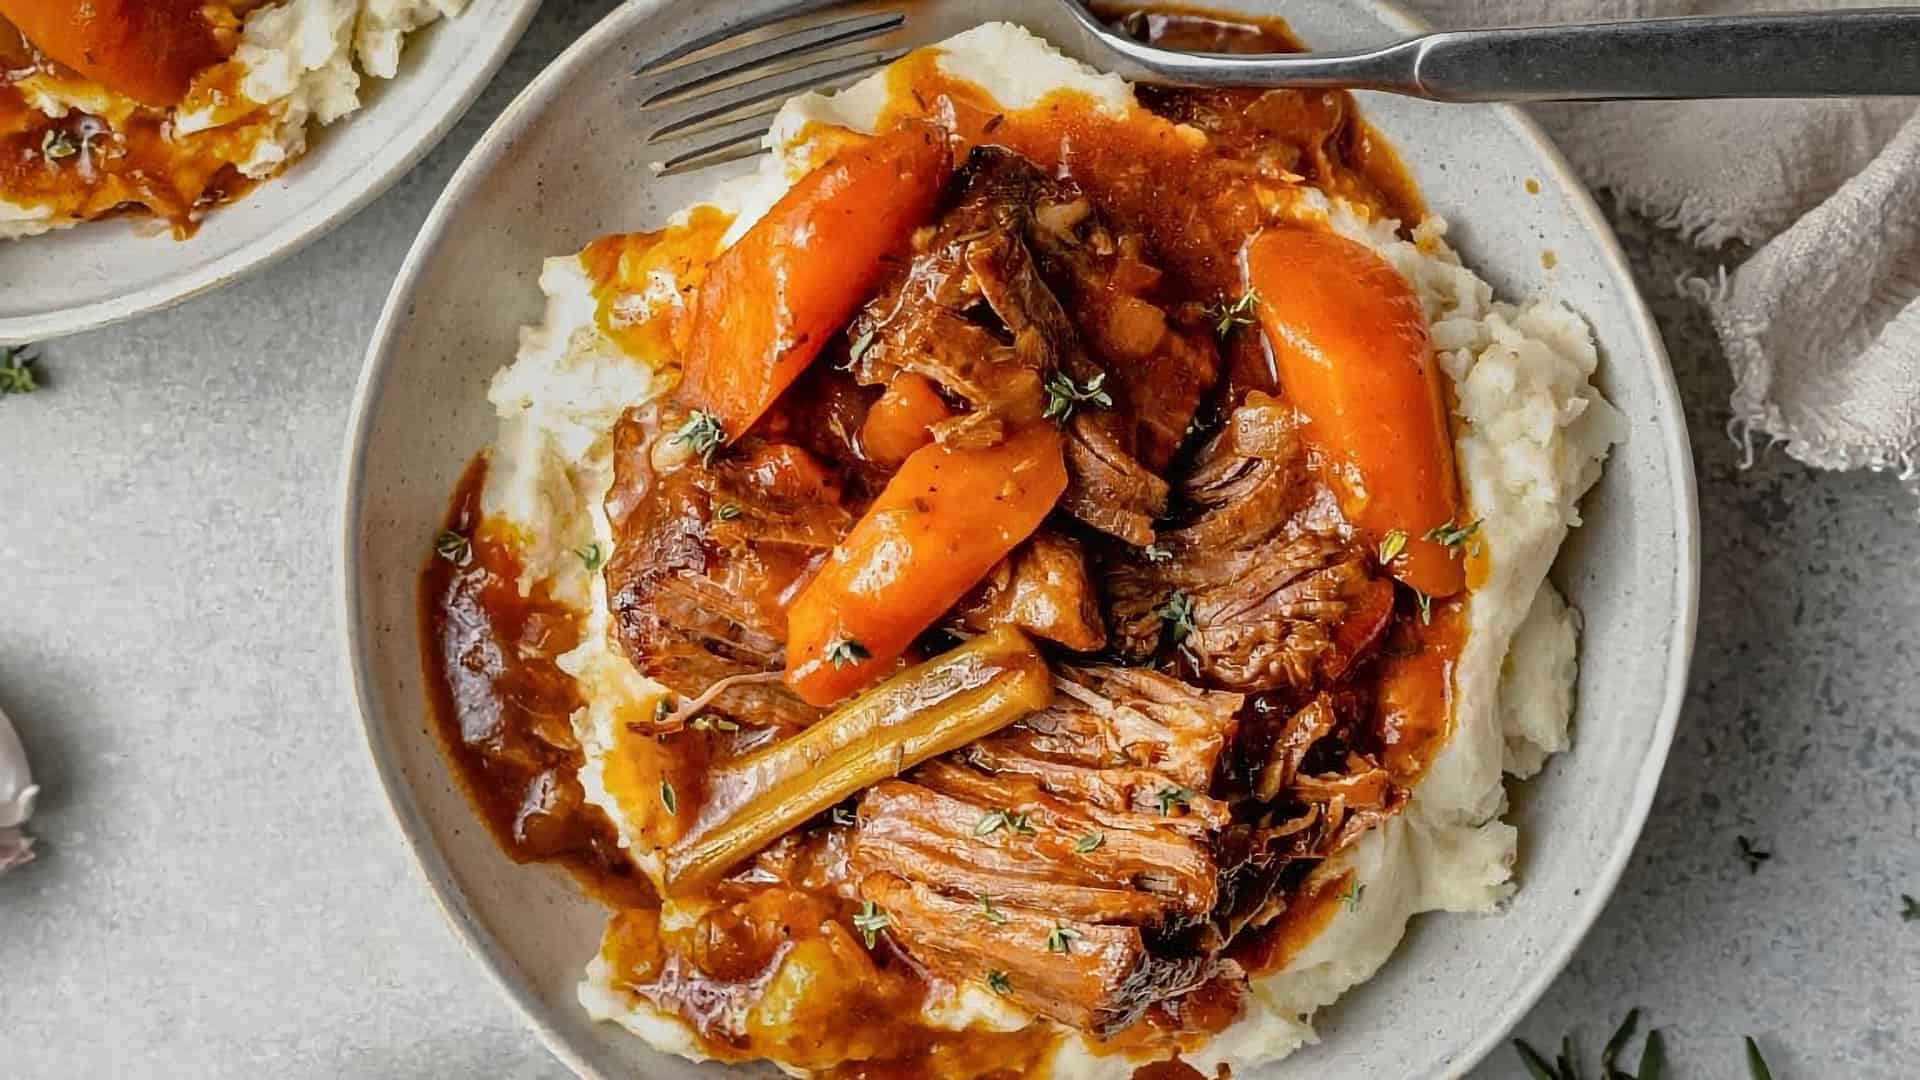 Recipes for Pot Roast in a Dutch Oven